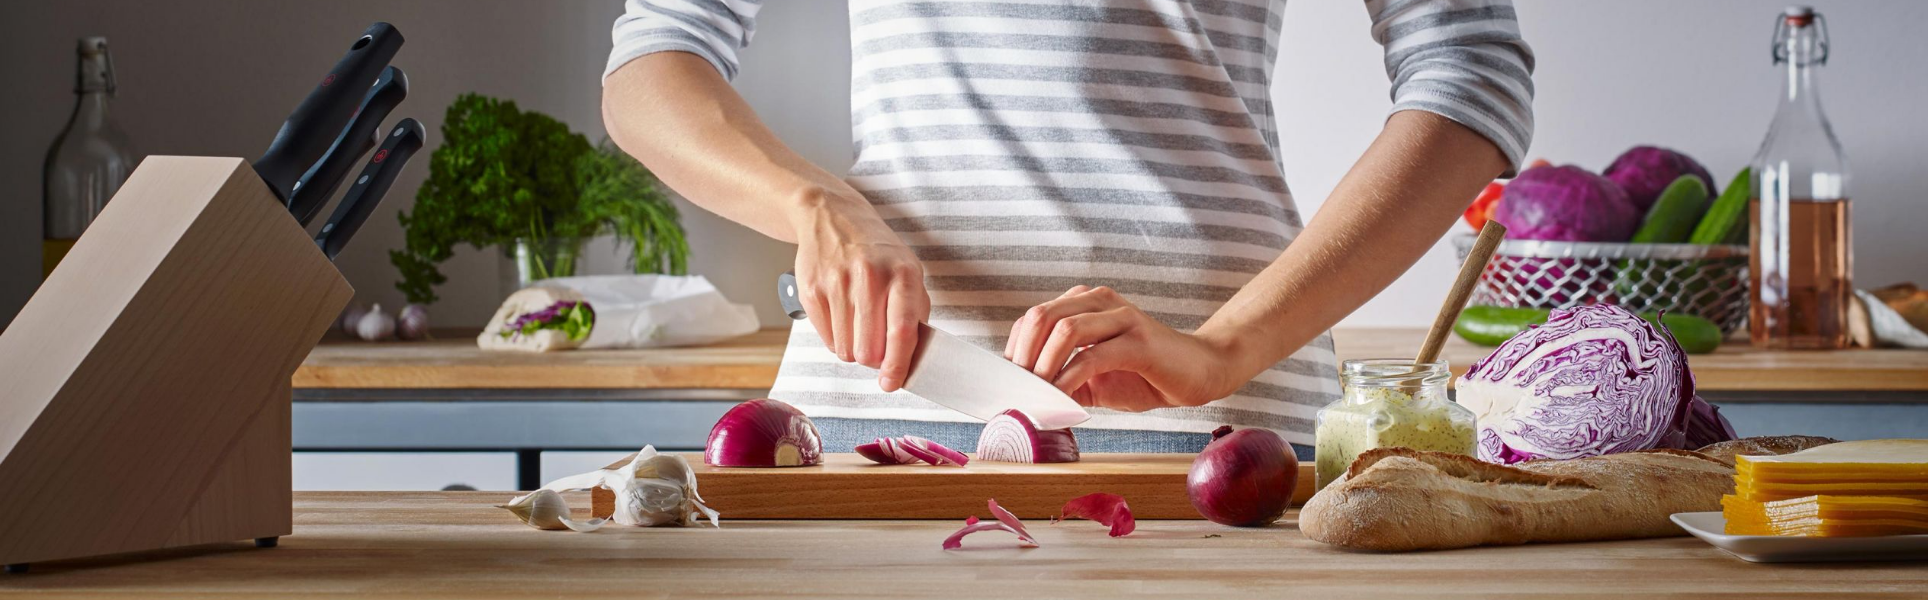 Woman Cutting a Red Onion